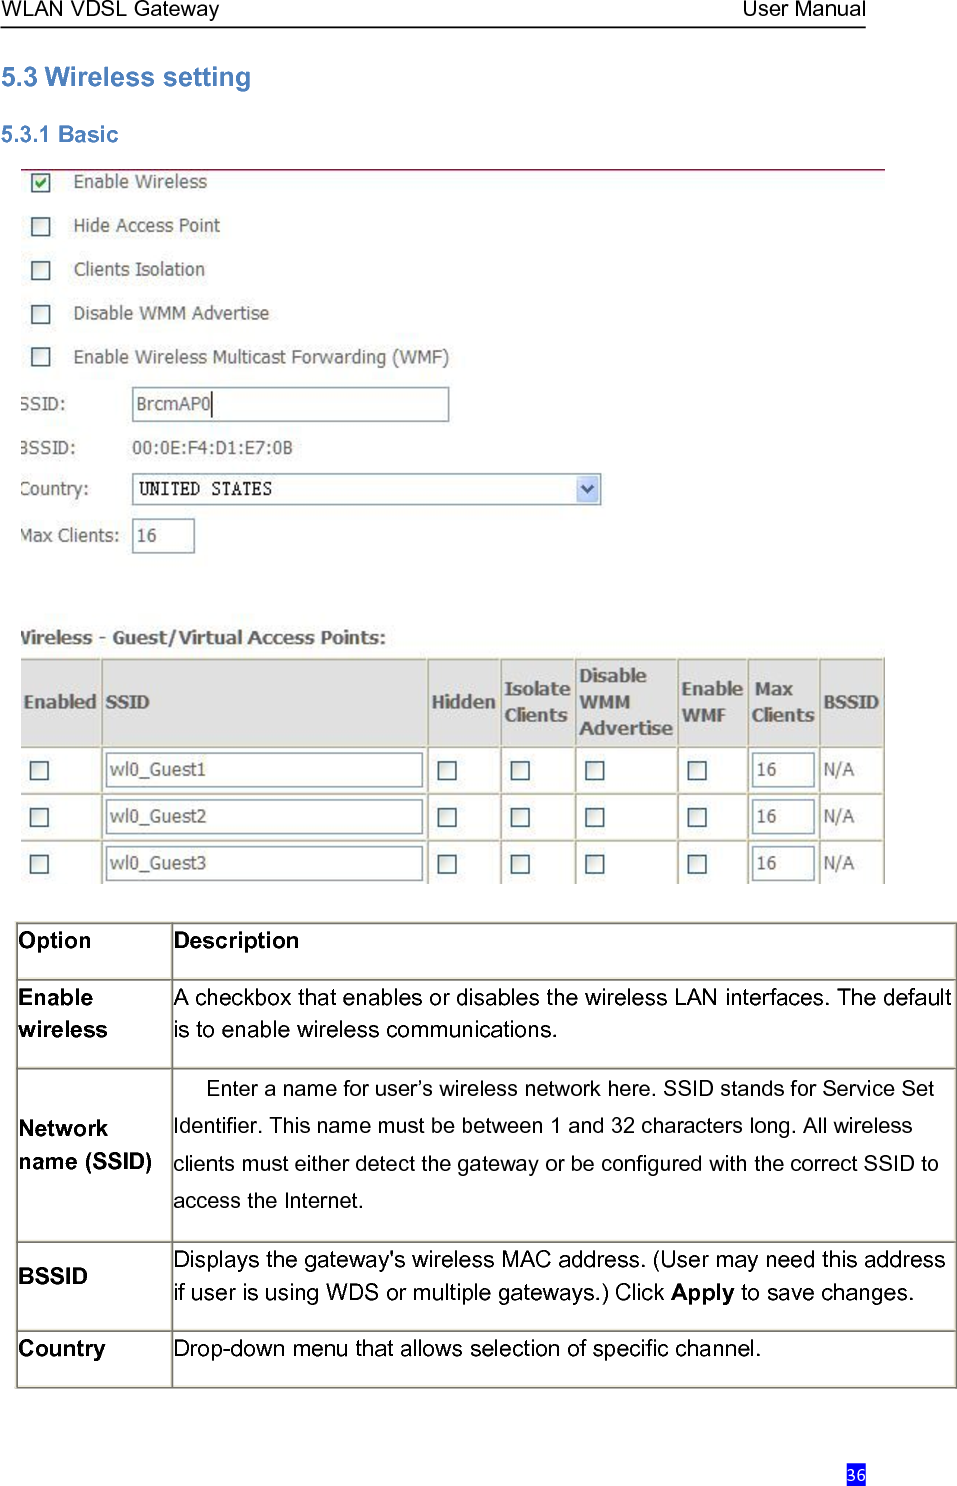 WLAN VDSL Gateway User Manual365.3 Wireless setting5.3.1 BasicOptionDescriptionEnablewirelessA checkbox that enables or disables the wireless LAN interfaces. The defaultis to enable wireless communications.Networkname (SSID)Enter a name for user’s wireless network here. SSID stands for Service SetIdentifier. This name must be between 1 and 32 characters long. All wirelessclients must either detect the gateway or be configured with the correct SSID toaccess the Internet.BSSIDDisplays the gateway&apos;s wireless MAC address. (User may need this addressif user is using WDS or multiple gateways.) Click Apply to save changes.CountryDrop-down menu that allows selection of specific channel.